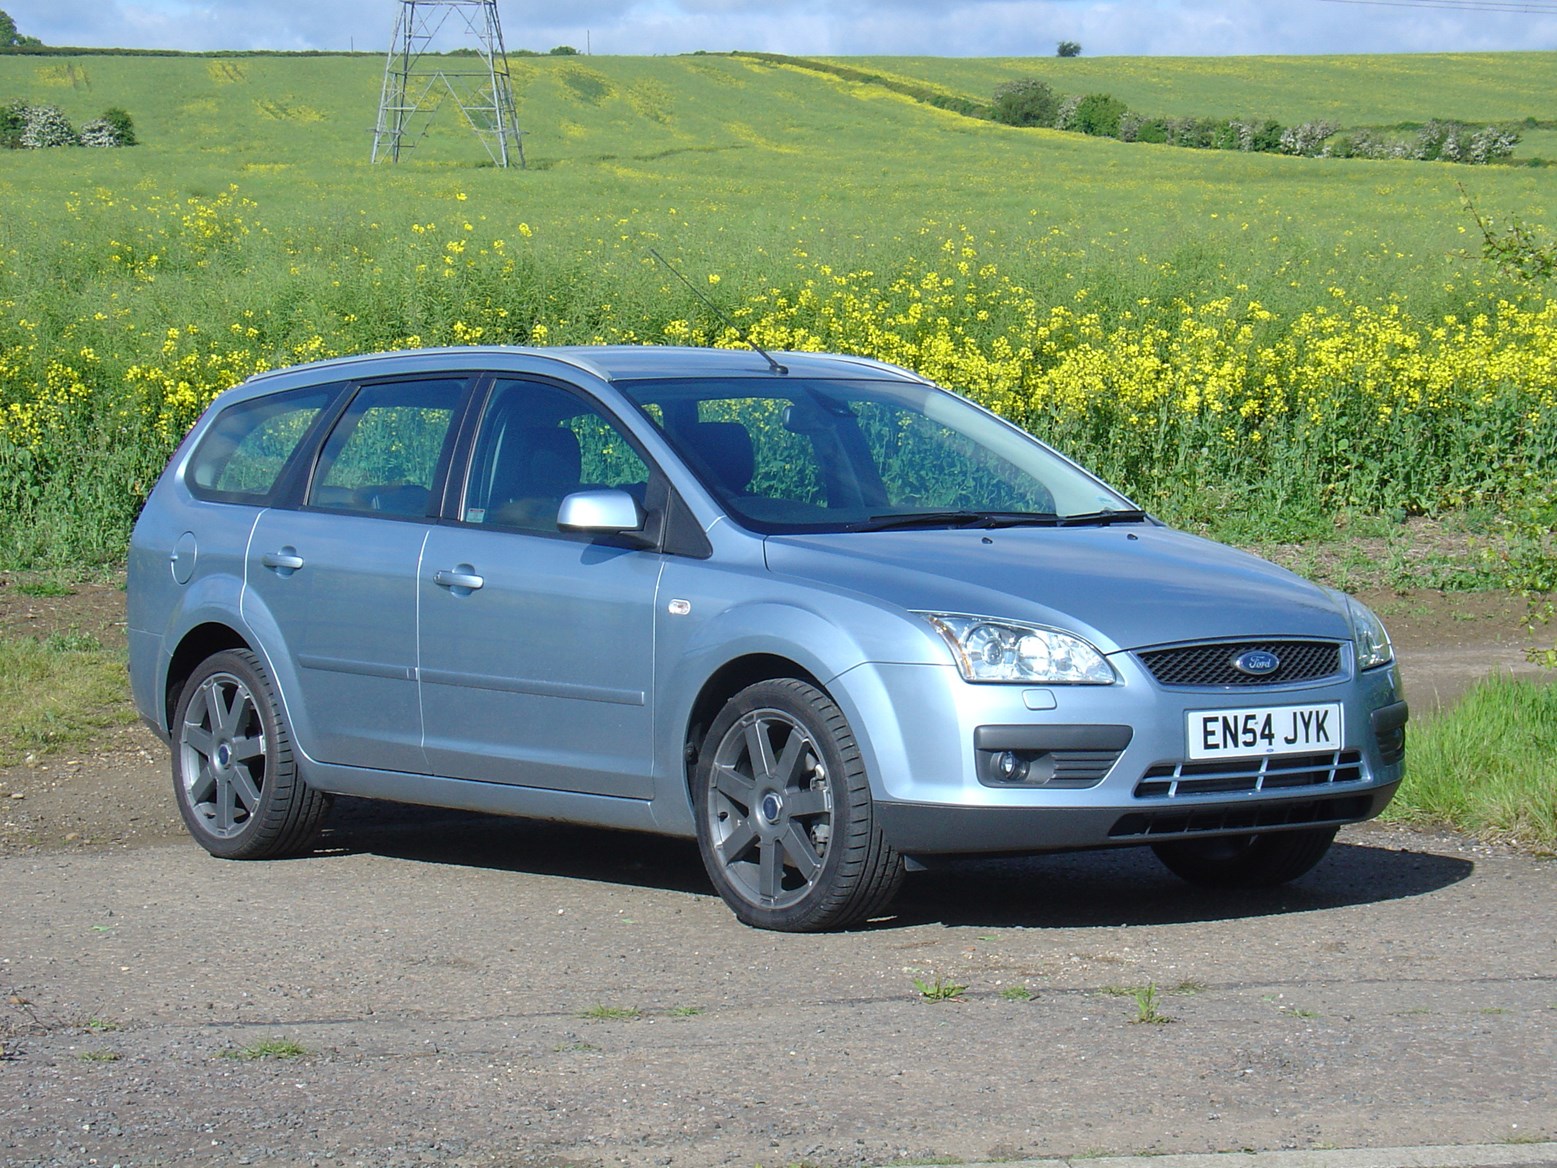 Used Ford Focus Estate 05 11 Review Parkers